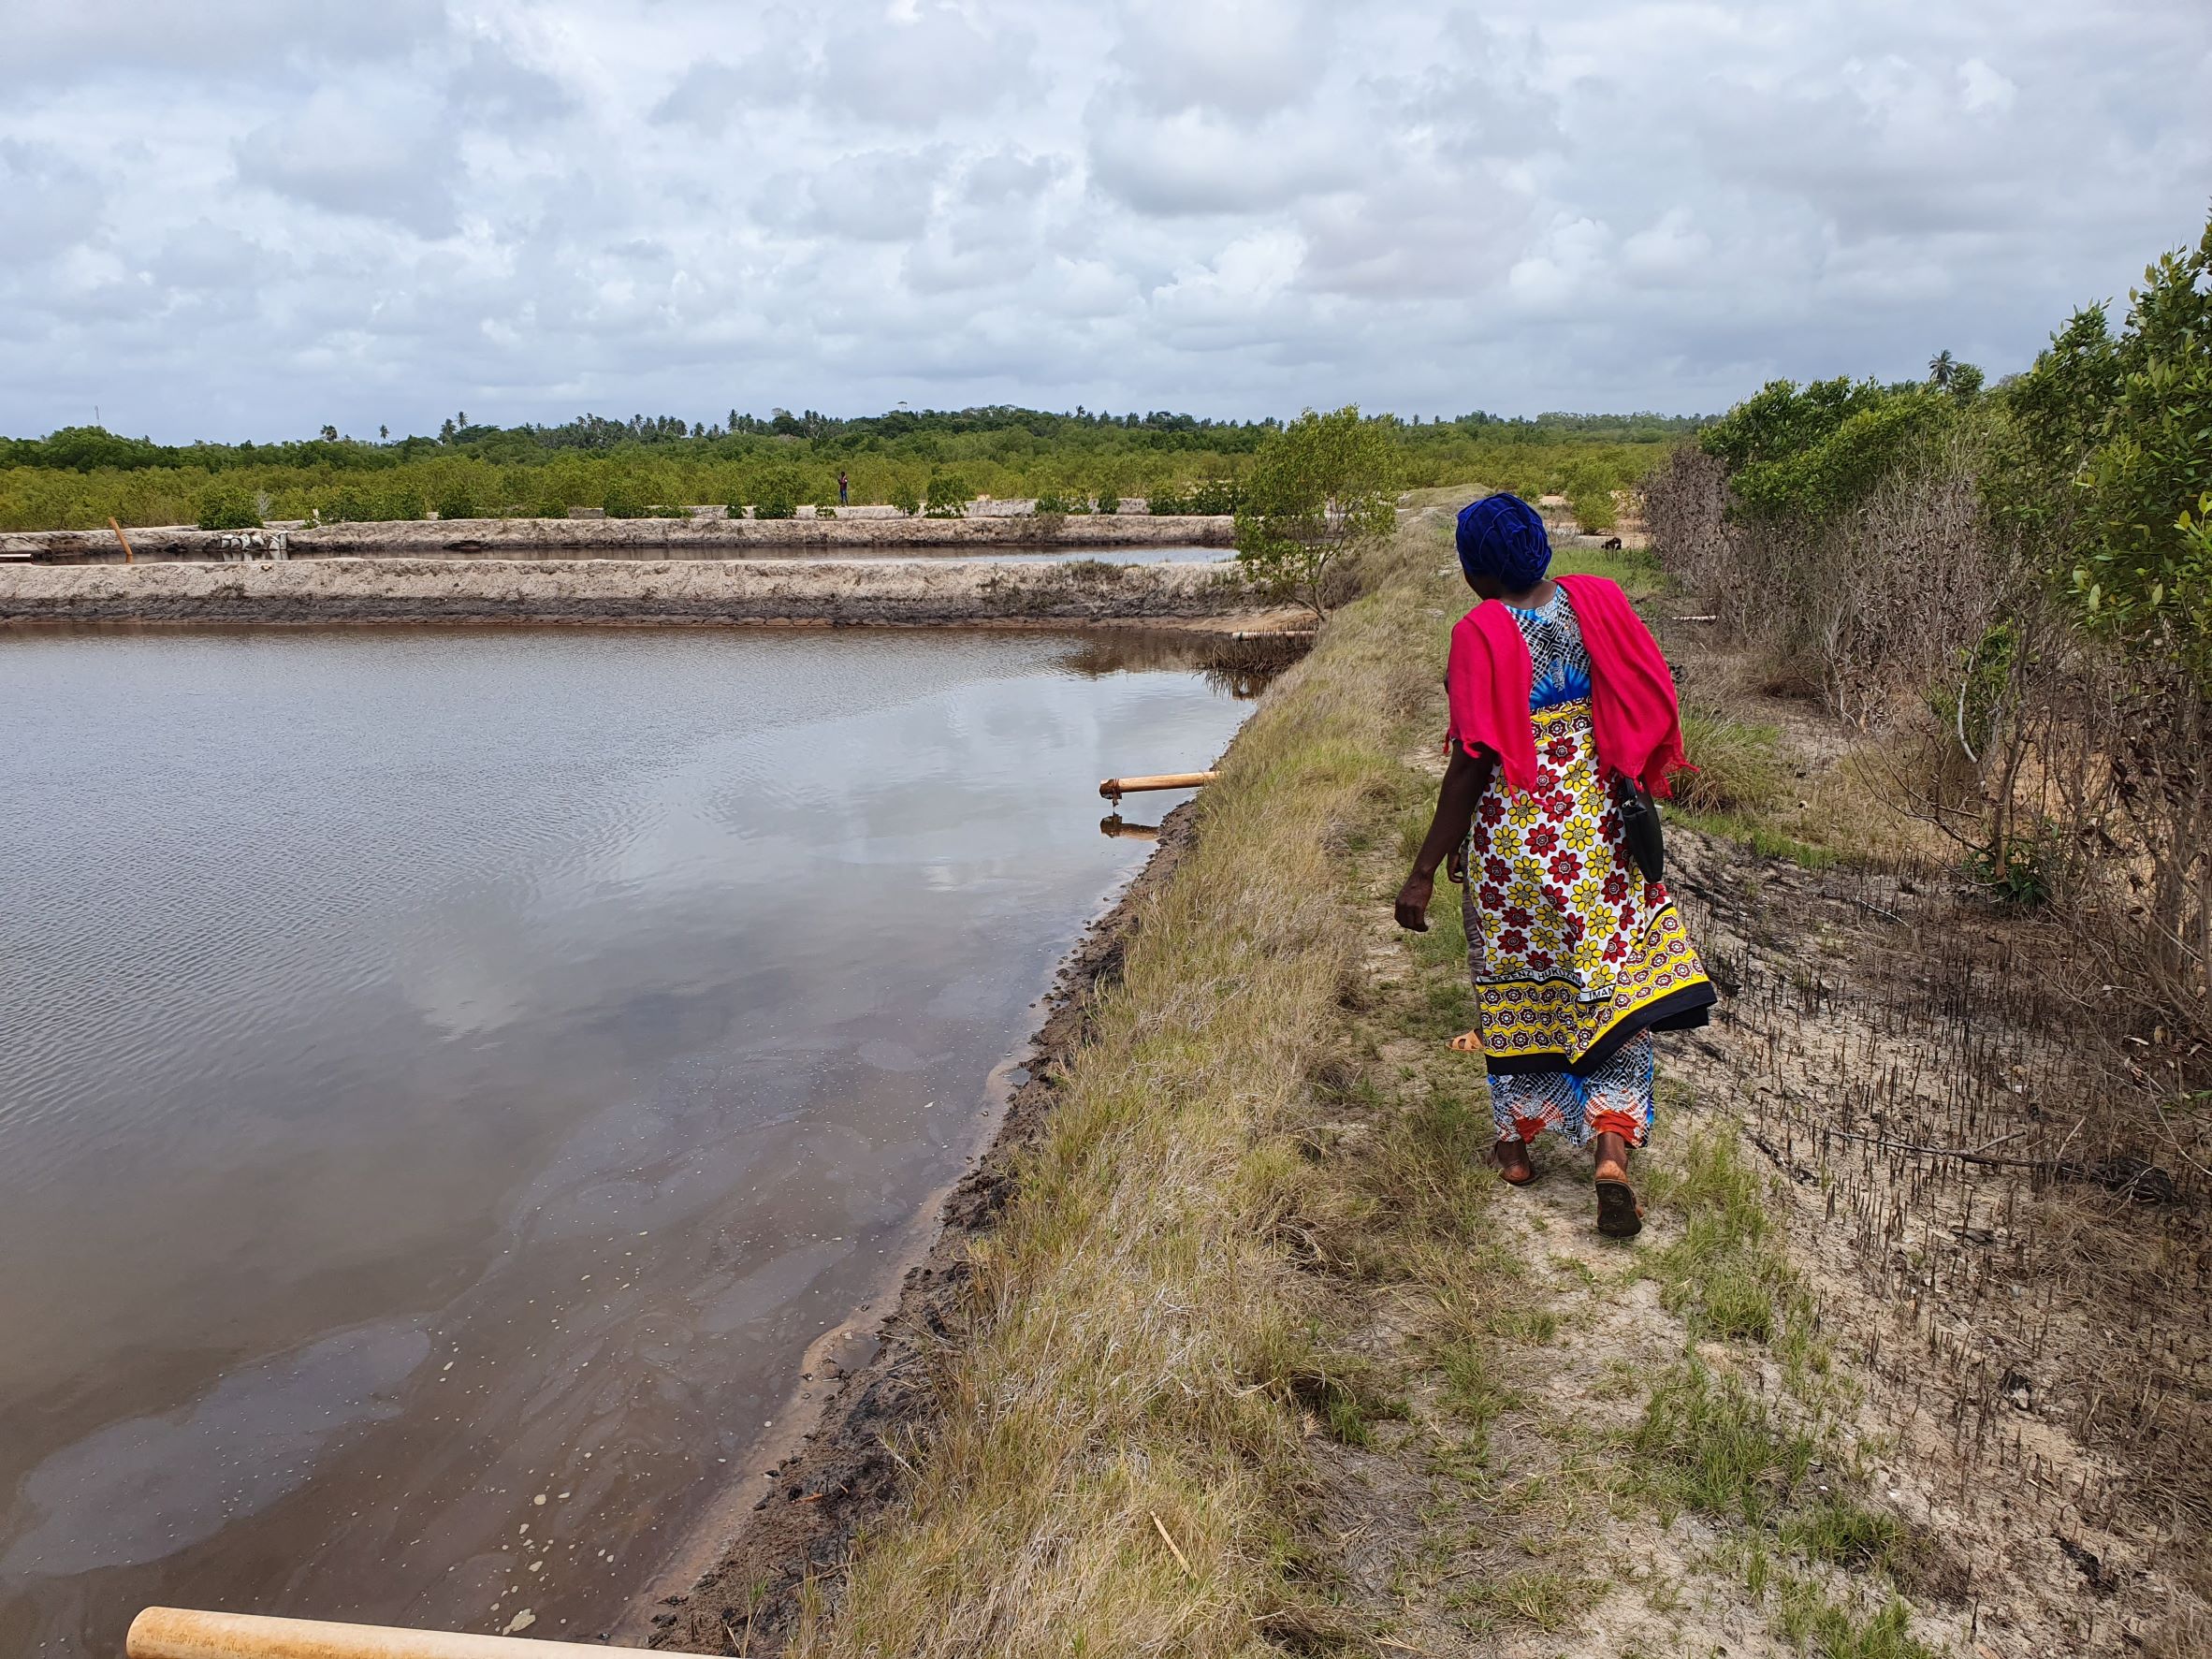 A woman faces away from the camera, walking along the edge of a low pond that is used for mariculture. she's dressed in colorful red, blue and yellow clothing and in the background you can see additional mariculture ponds